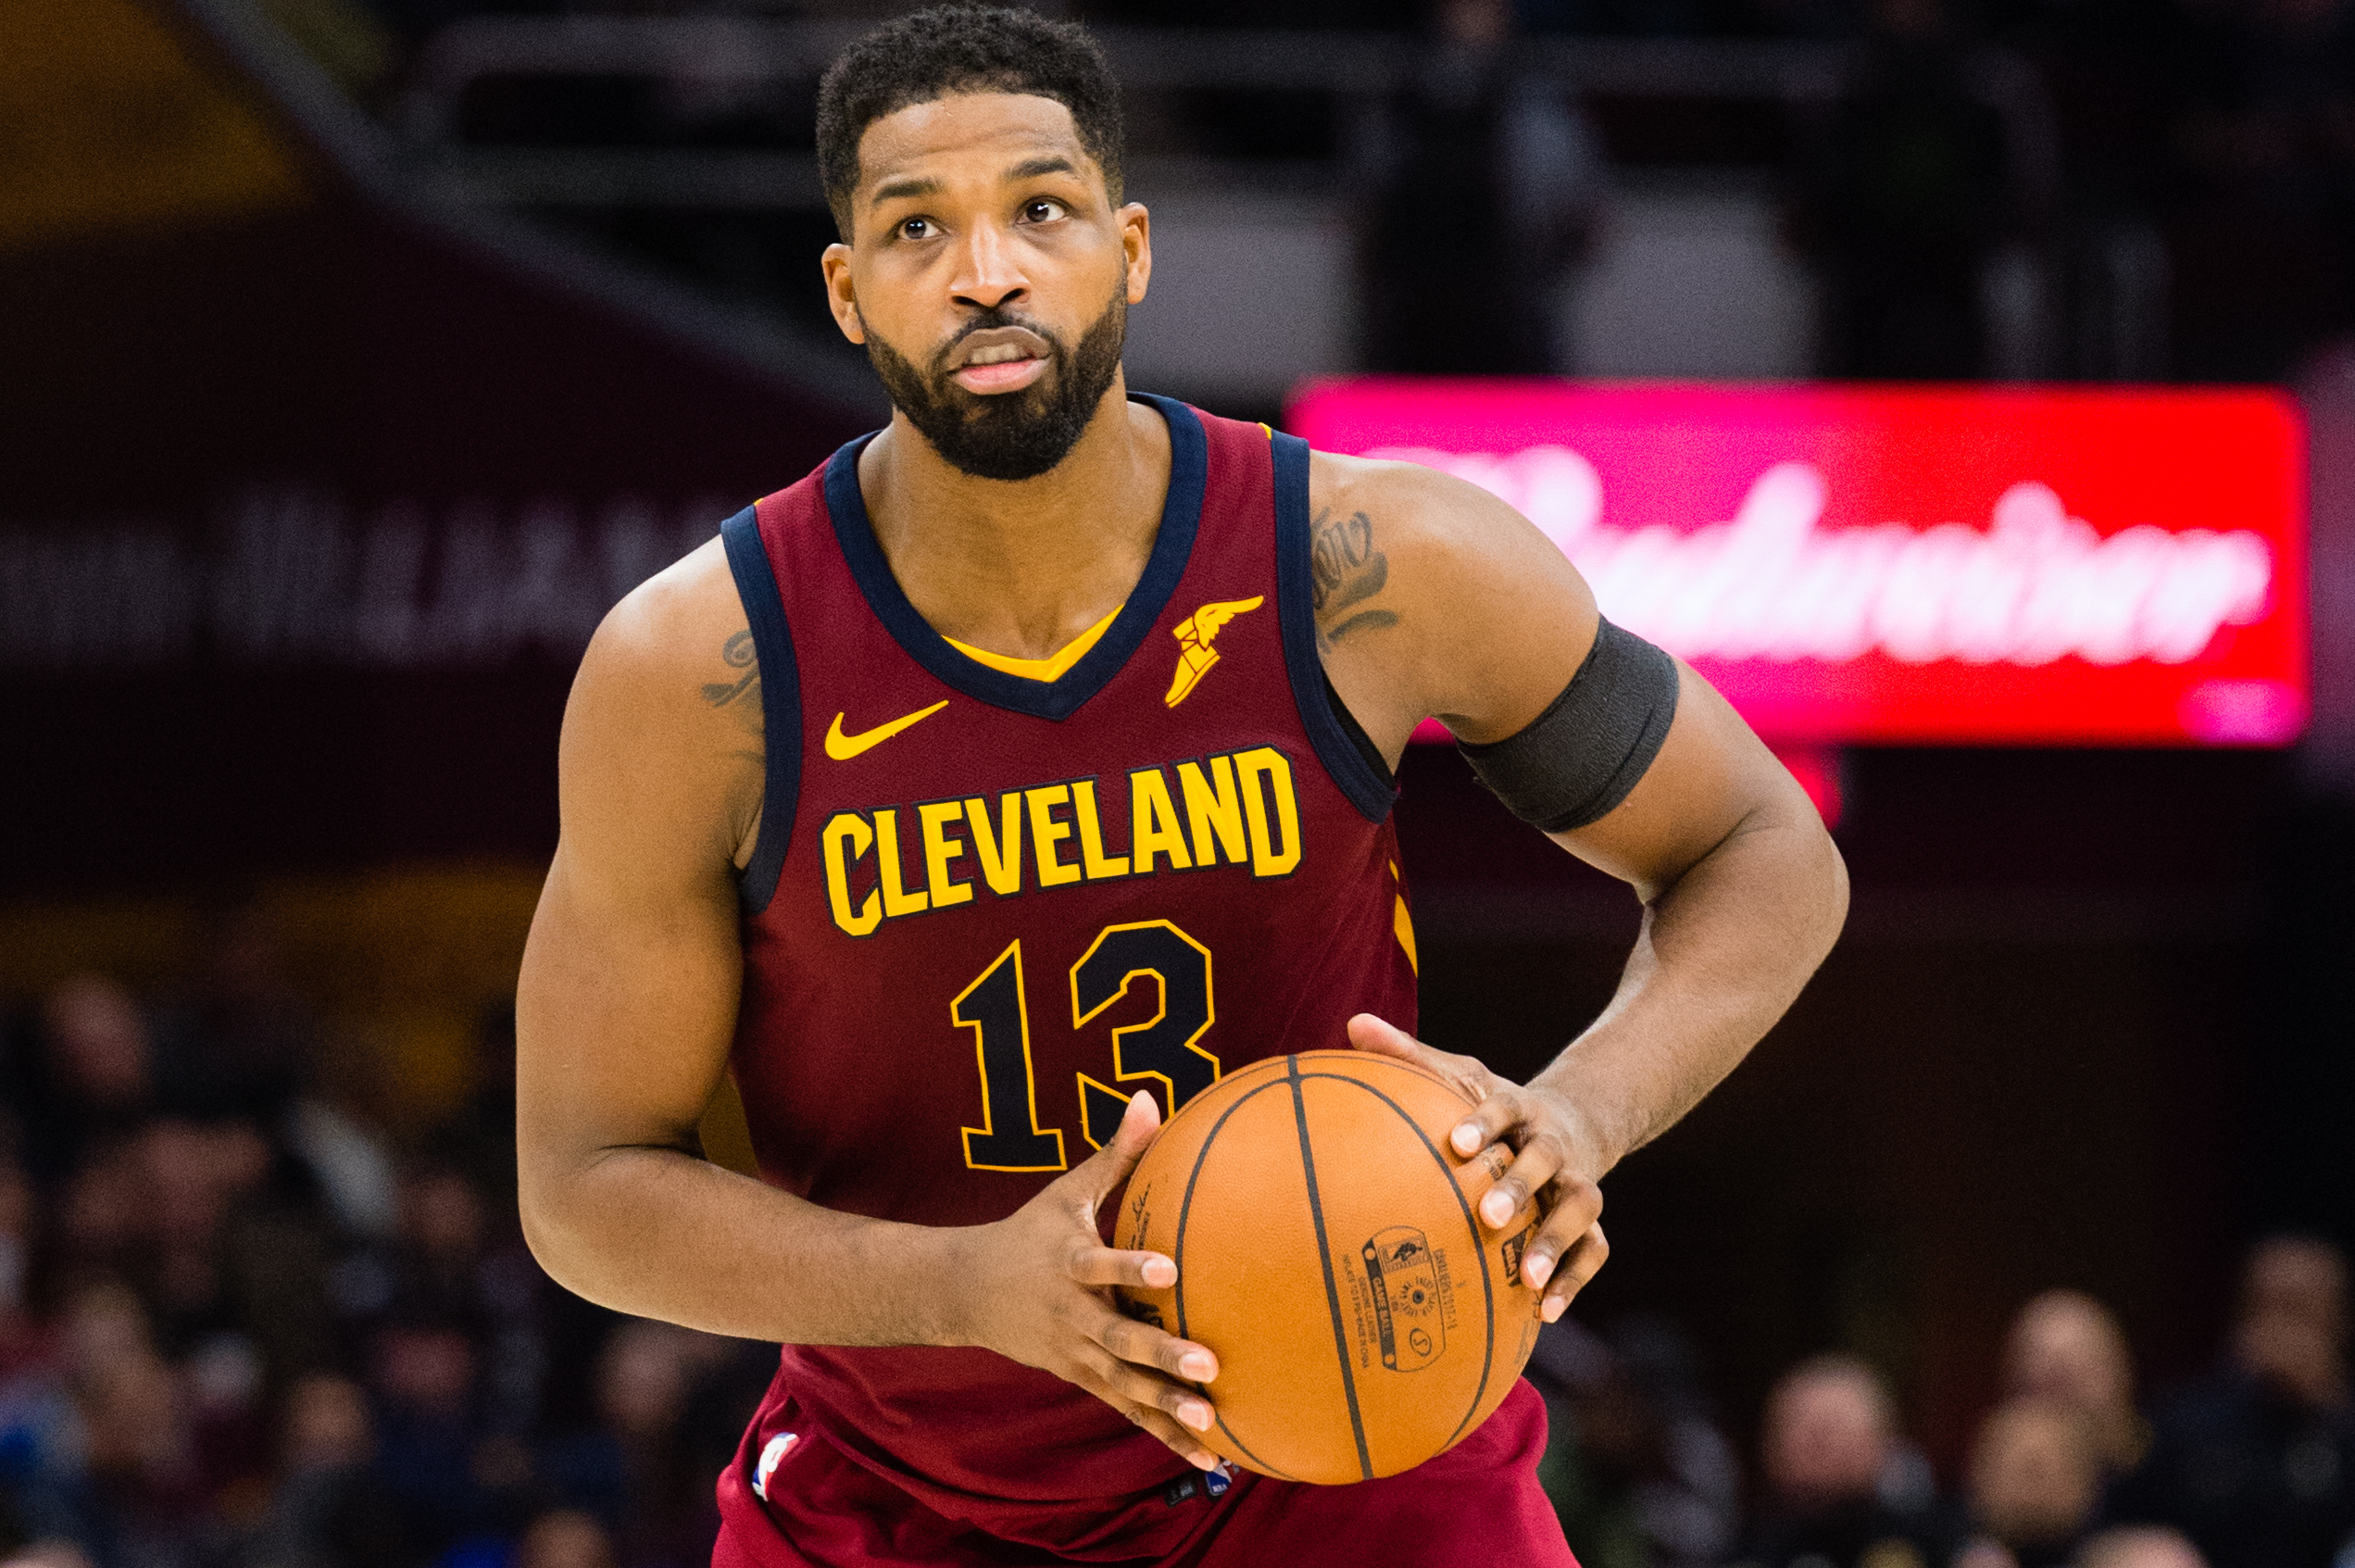 Tristan Thompson S Benching Has More To Do With Basketball Than Off Court Drama Bleacher Report Latest News Videos And Highlights